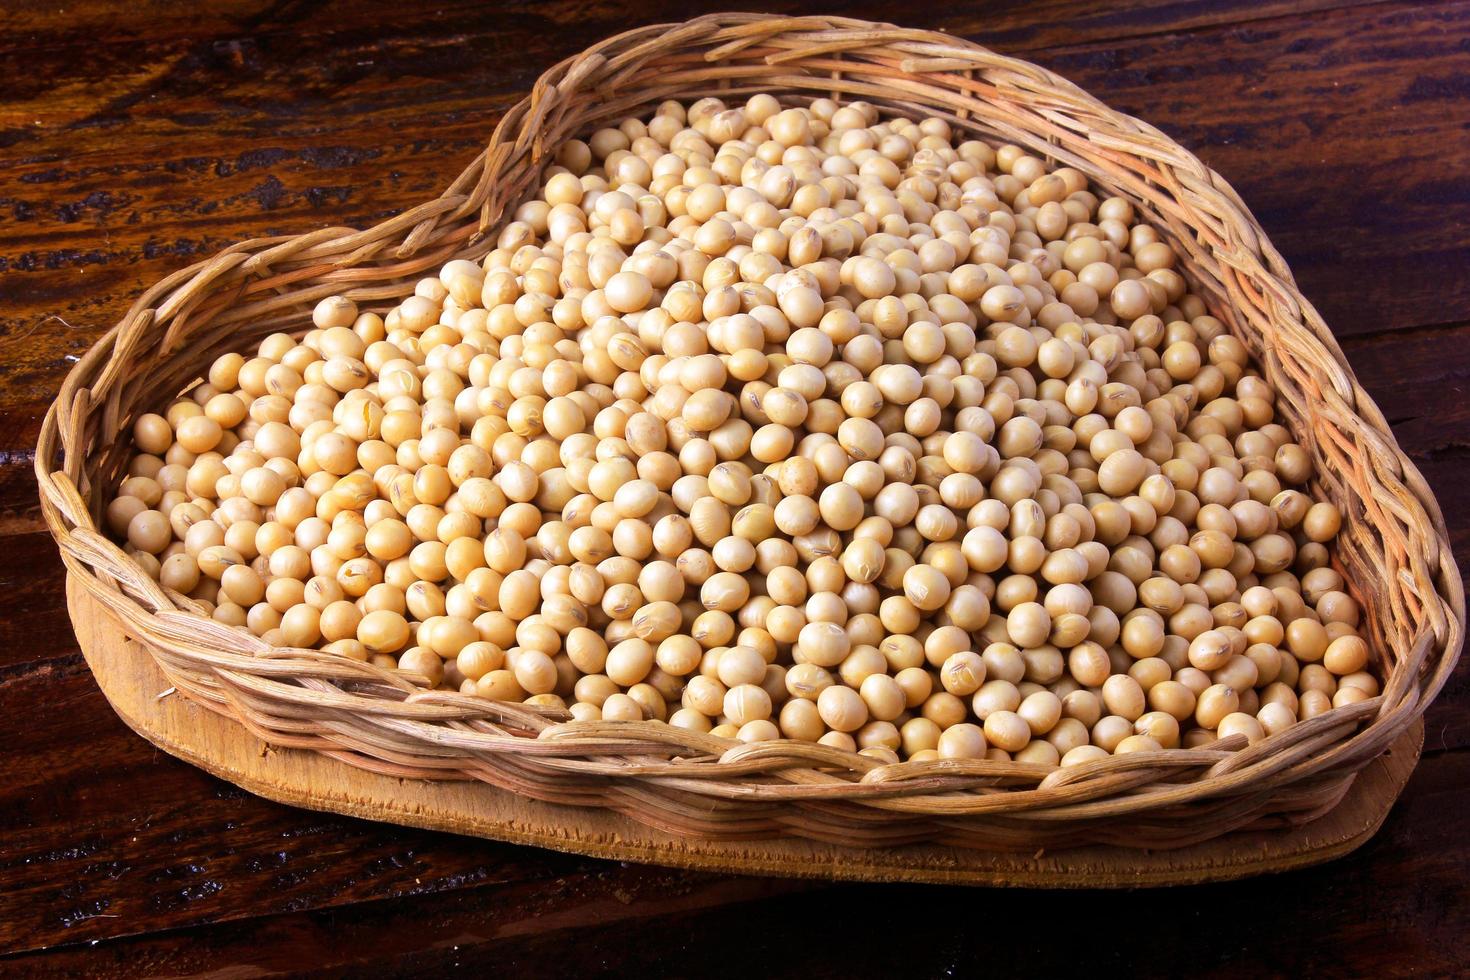 raw and fresh soy beans inside basket with heart shape on rustic wooden table. Closeup photo